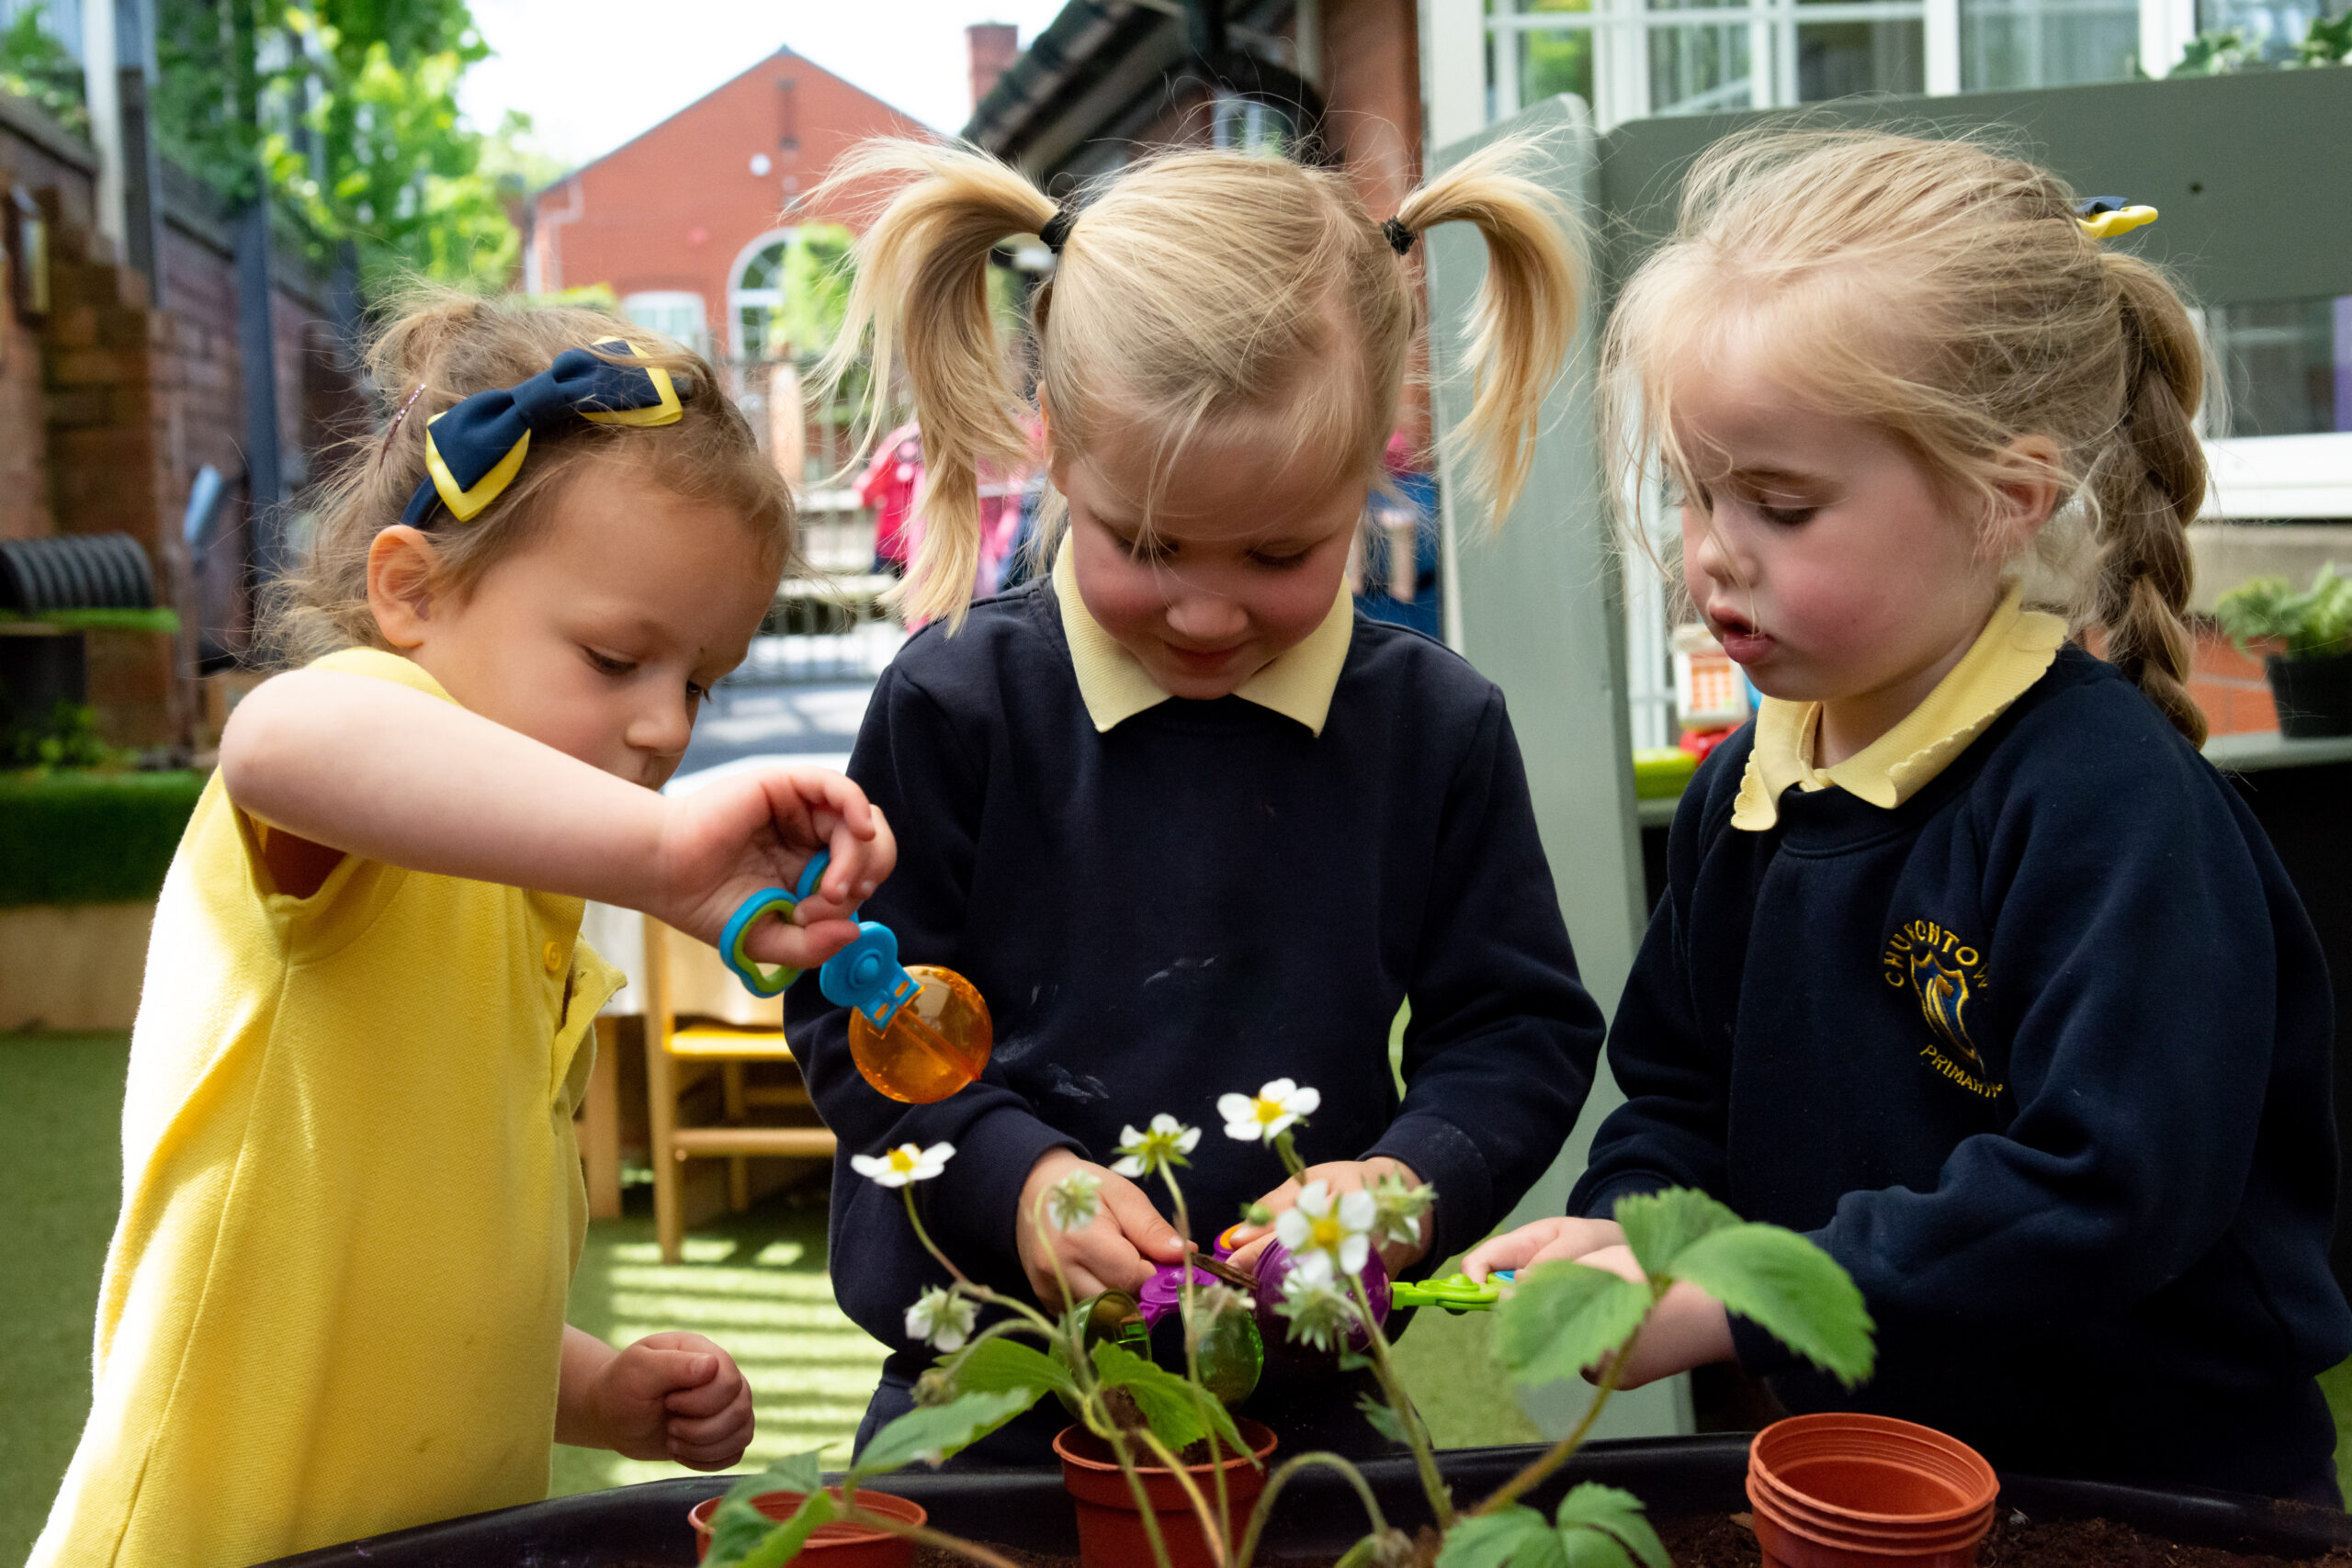 Churchtown Primary School in Southport is taking proactive steps to align with the Government's new initiative to provide free childcare for working parents of two-year-olds